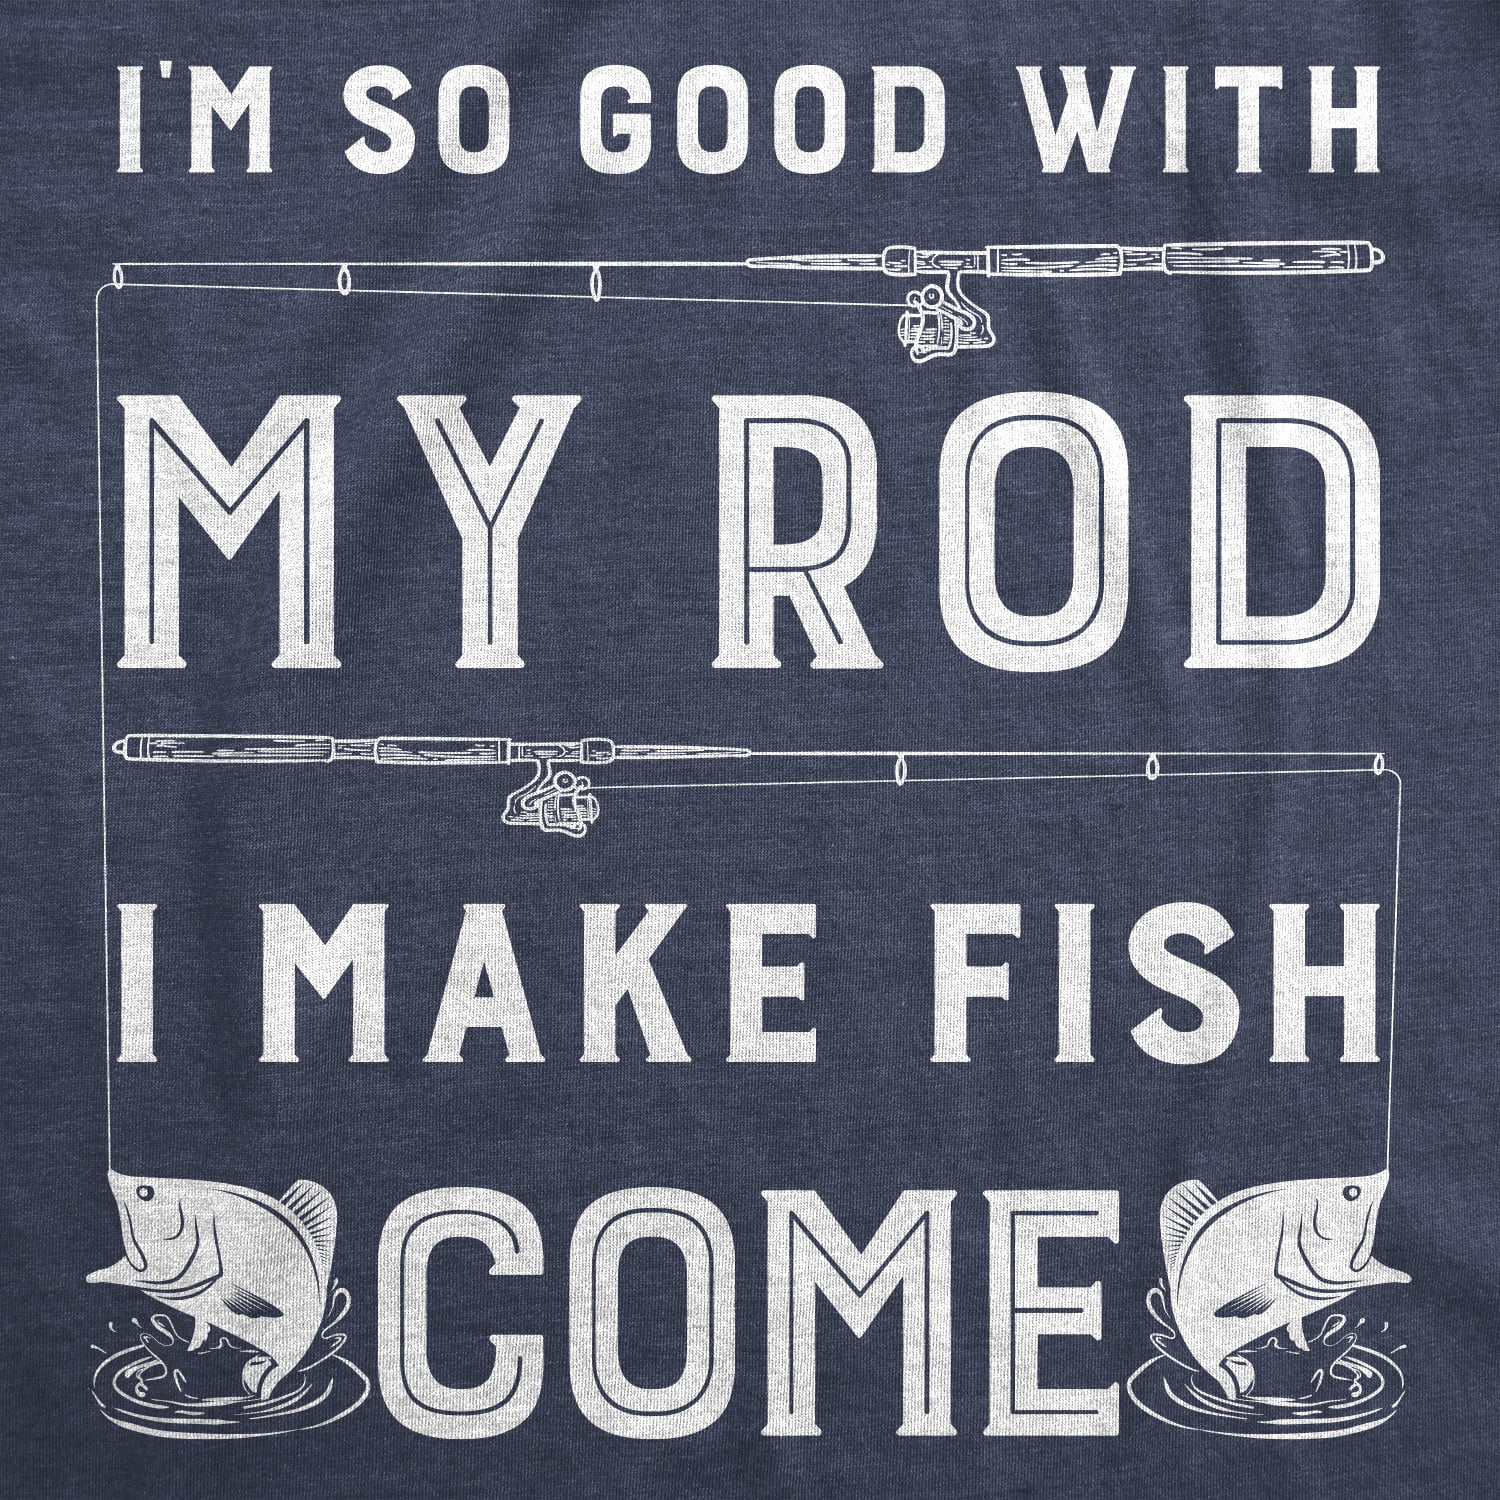 So Good With My Rod.. Shirts I Make Fish Come!